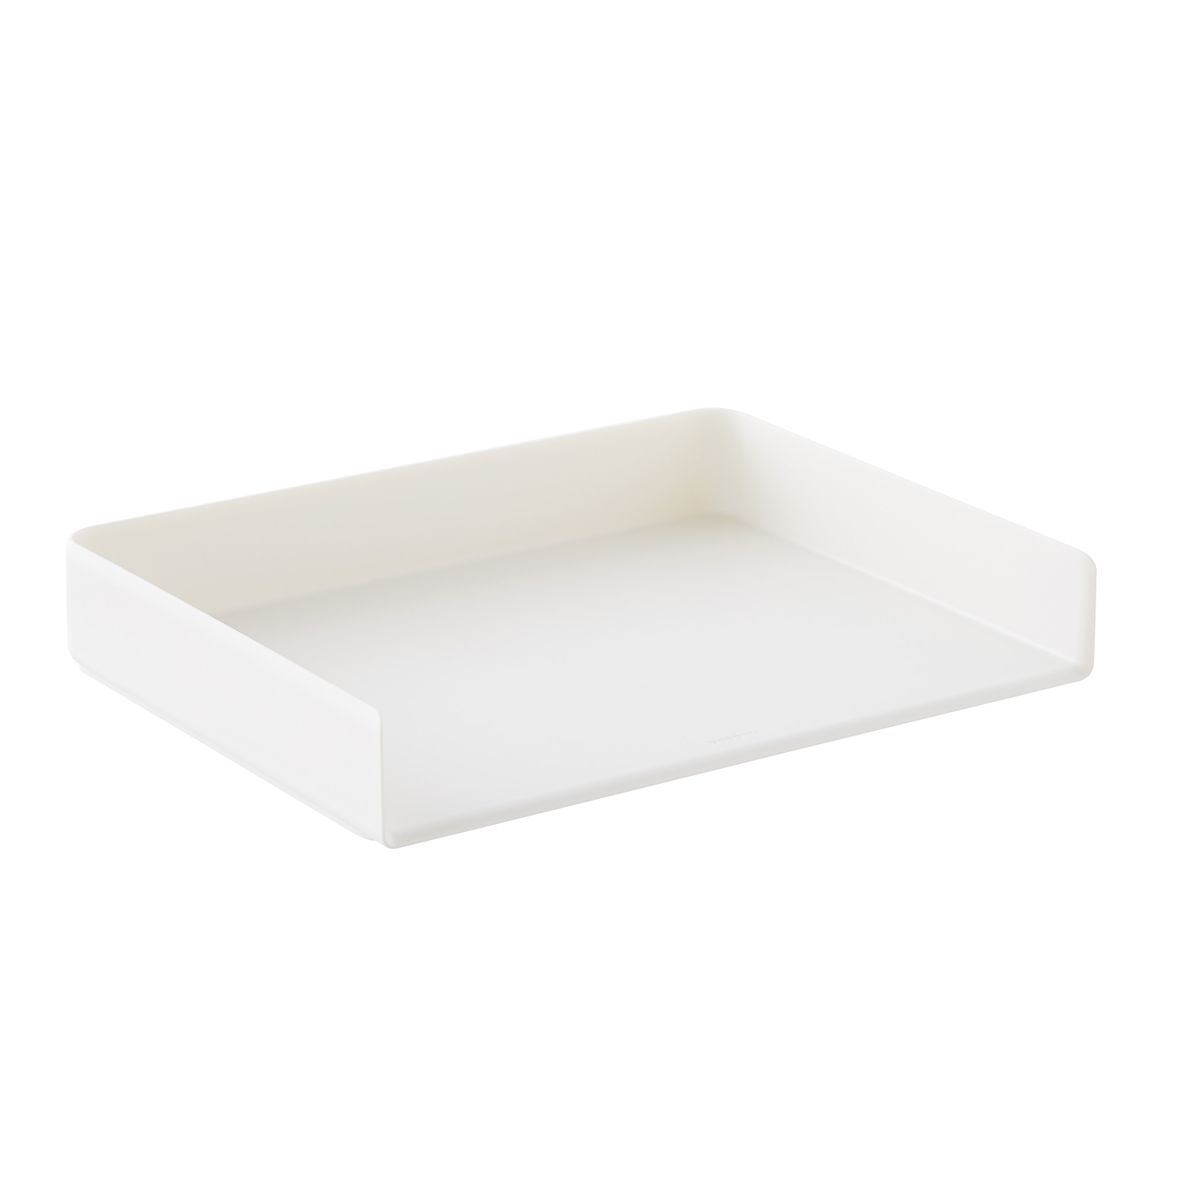 Landscape Letter Tray | The Container Store